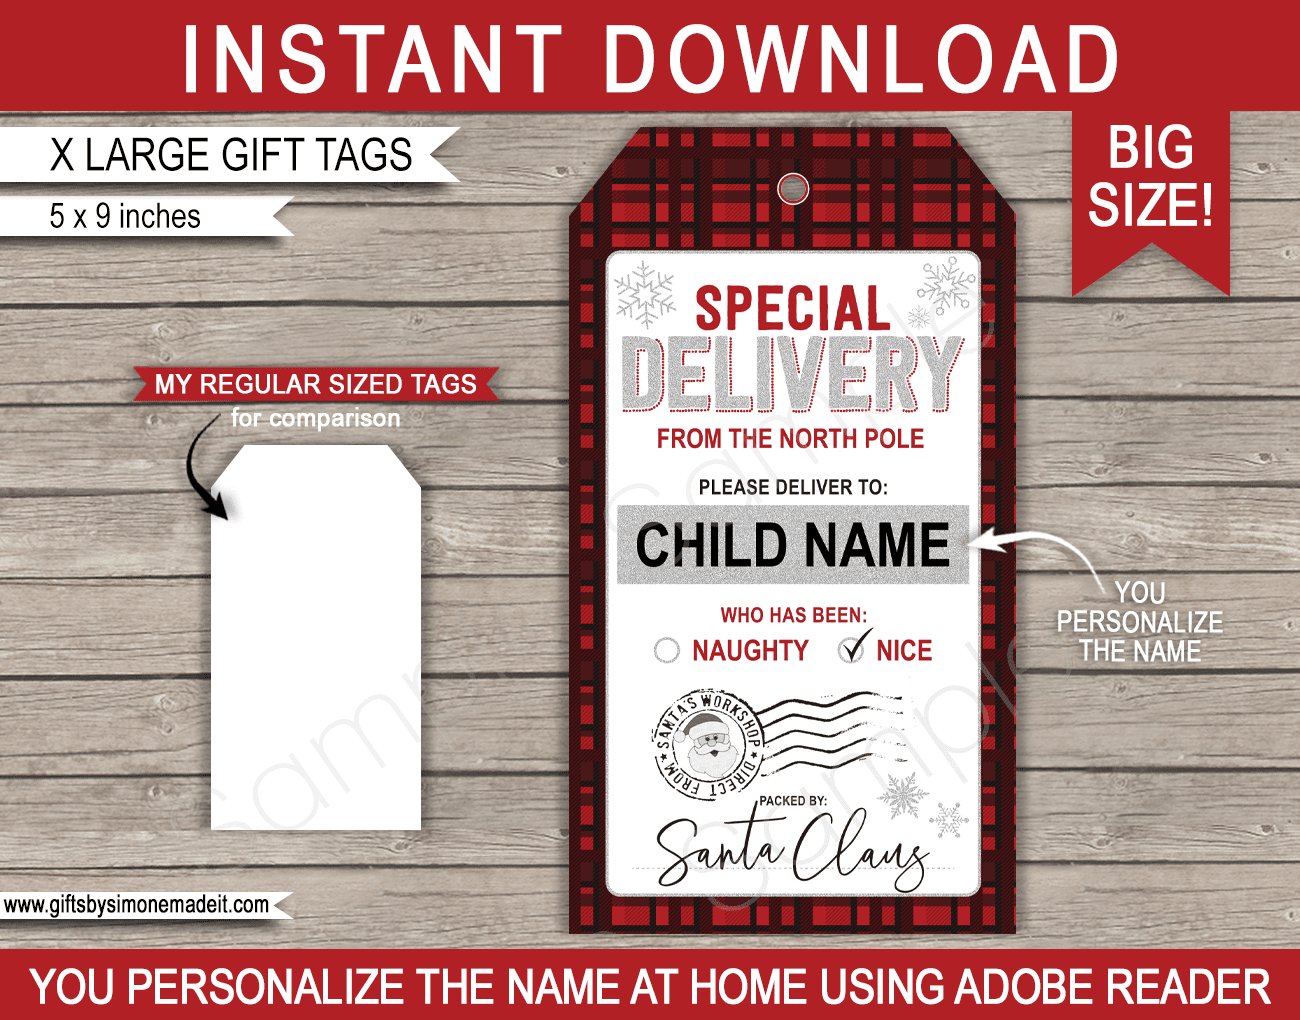 Printable Large Gift Tag Template  Large gift tag template, Large